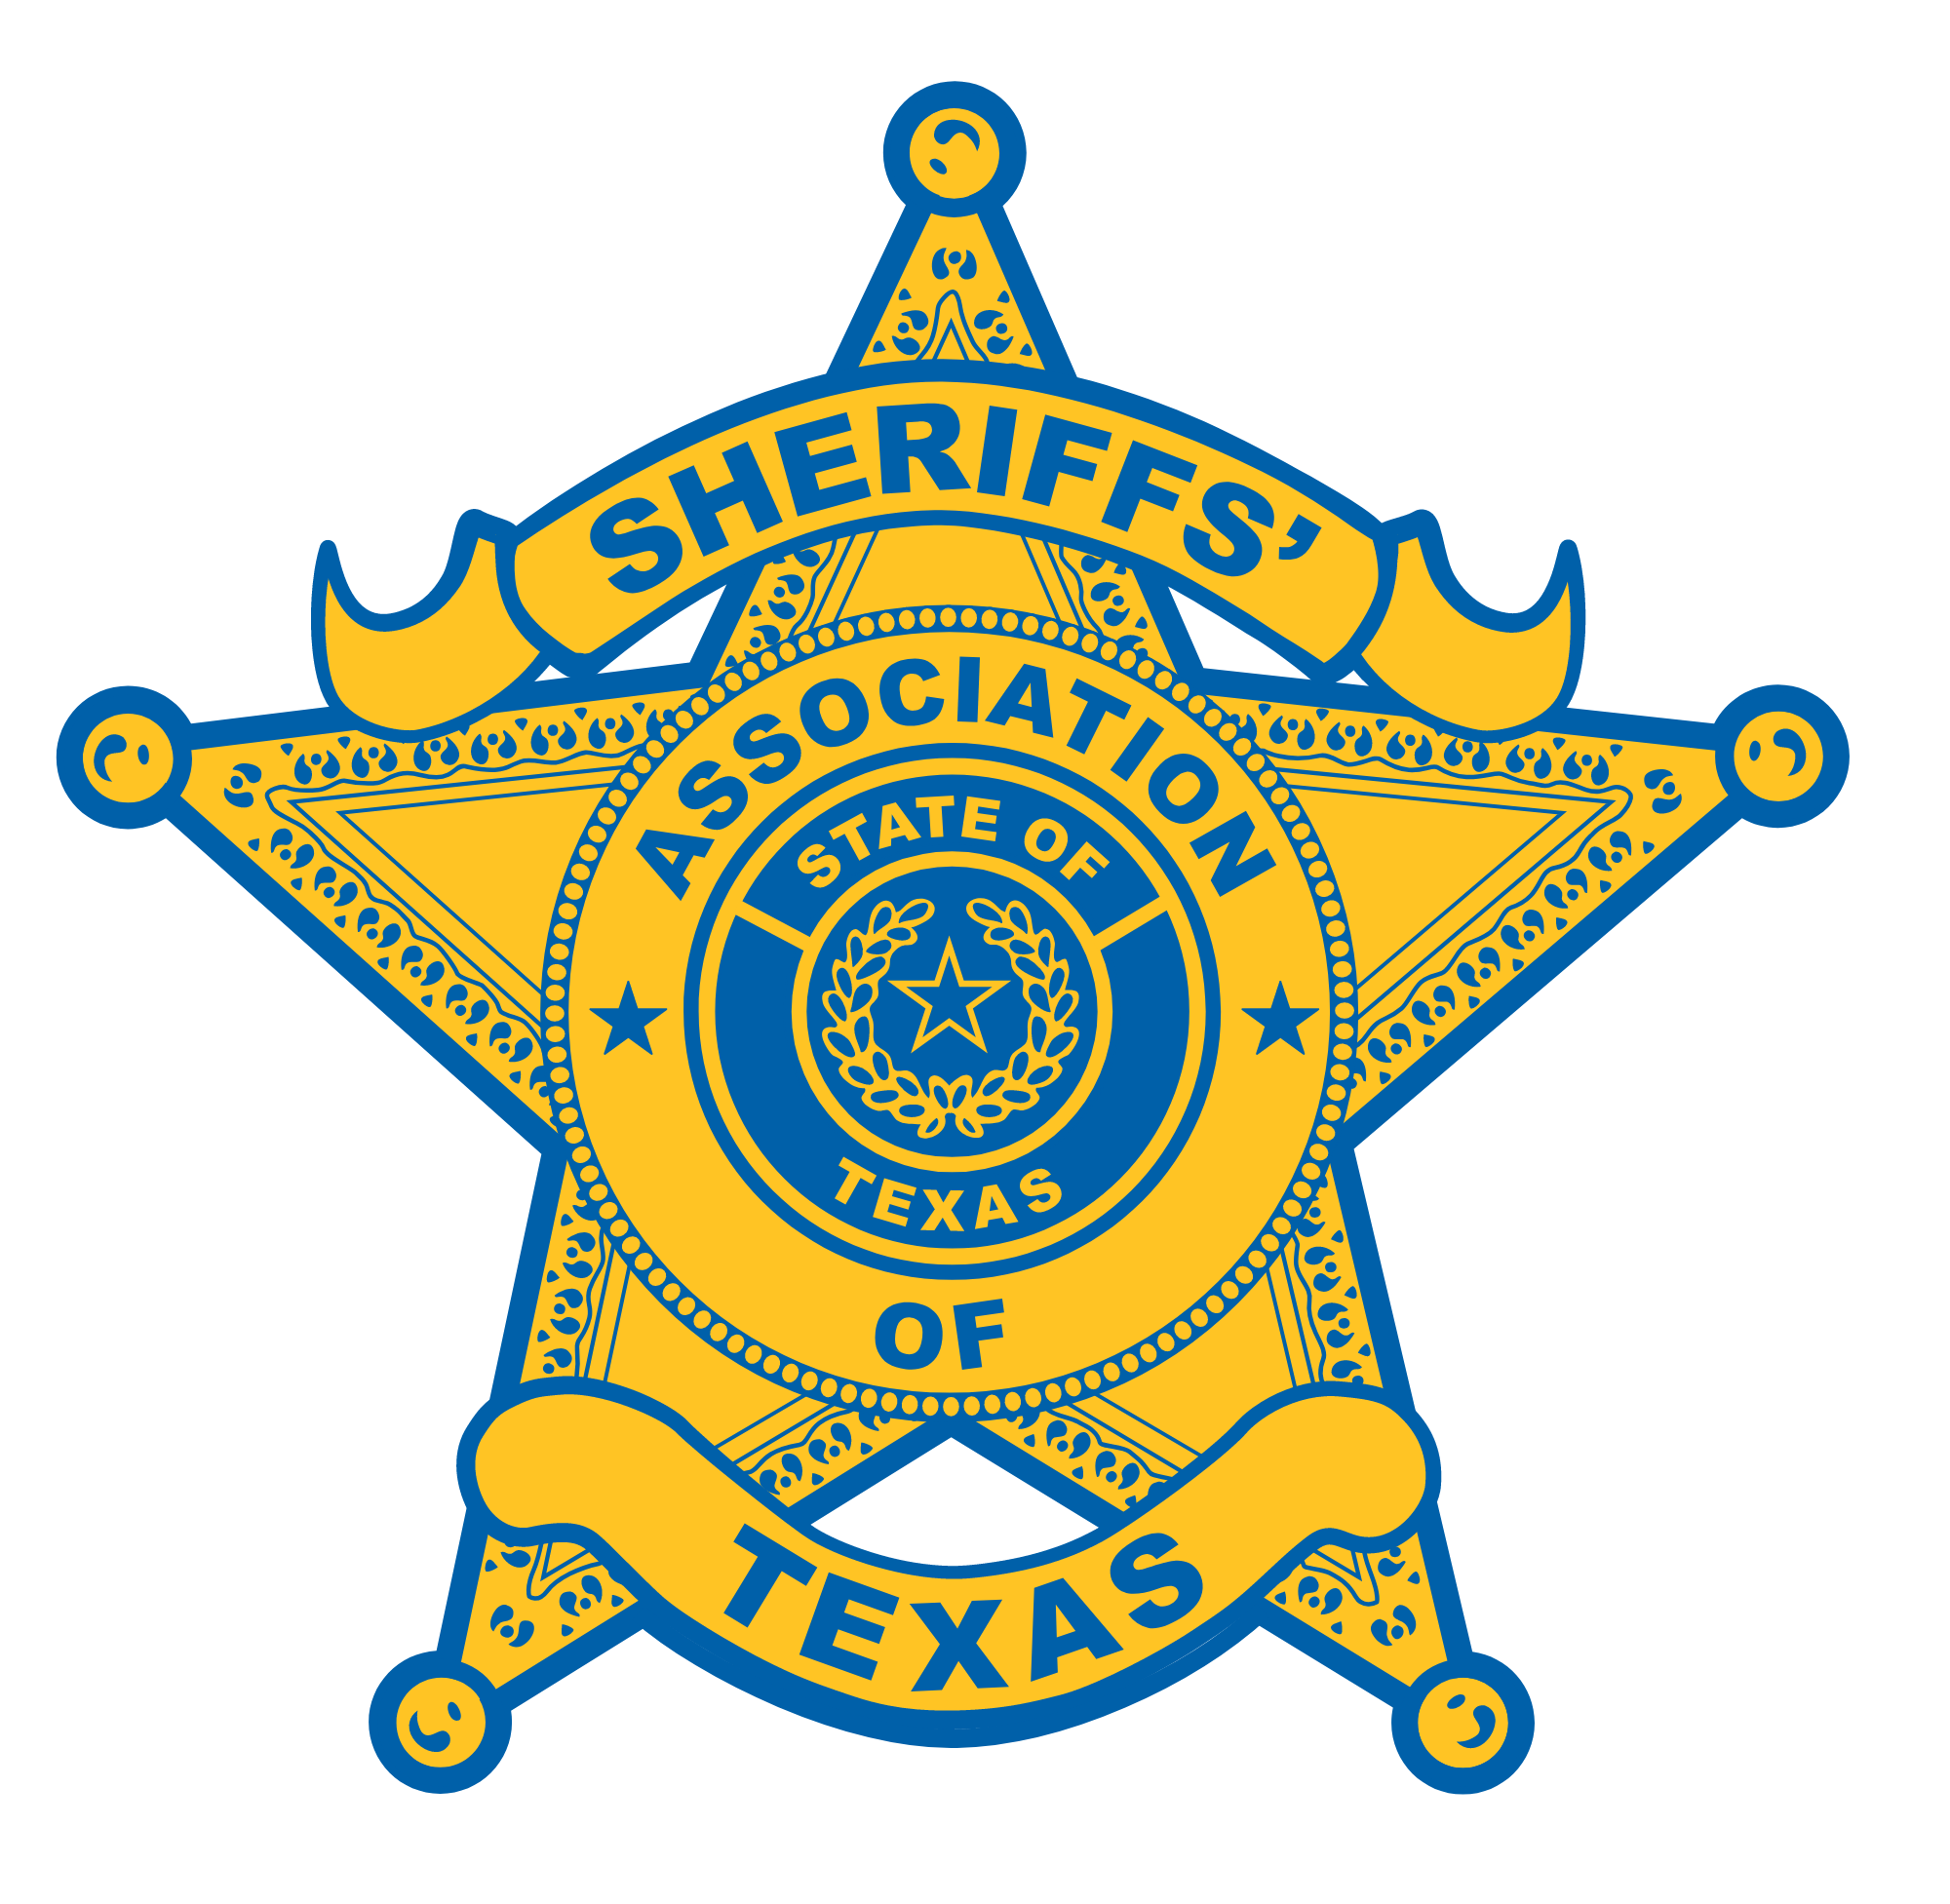 The Sheriffs' Association of Texas logo showcases an authoritative star badge, characterized by five points and golden colors, outlined in blue. The star badge serves as the focal point of the logo, symbolizing the authority and professionalism of the association. The name of the association is designed to seamlessly integrate with the star badge, forming a cohesive visual representation. At the center of the name, the Texas Seal is prominently featured, representing the association's connection to law enforcement in the state of Texas. This logo represents the Sheriffs' Association of Texas and its commitment to serving and supporting sheriffs and law enforcement professionals throughout the state.